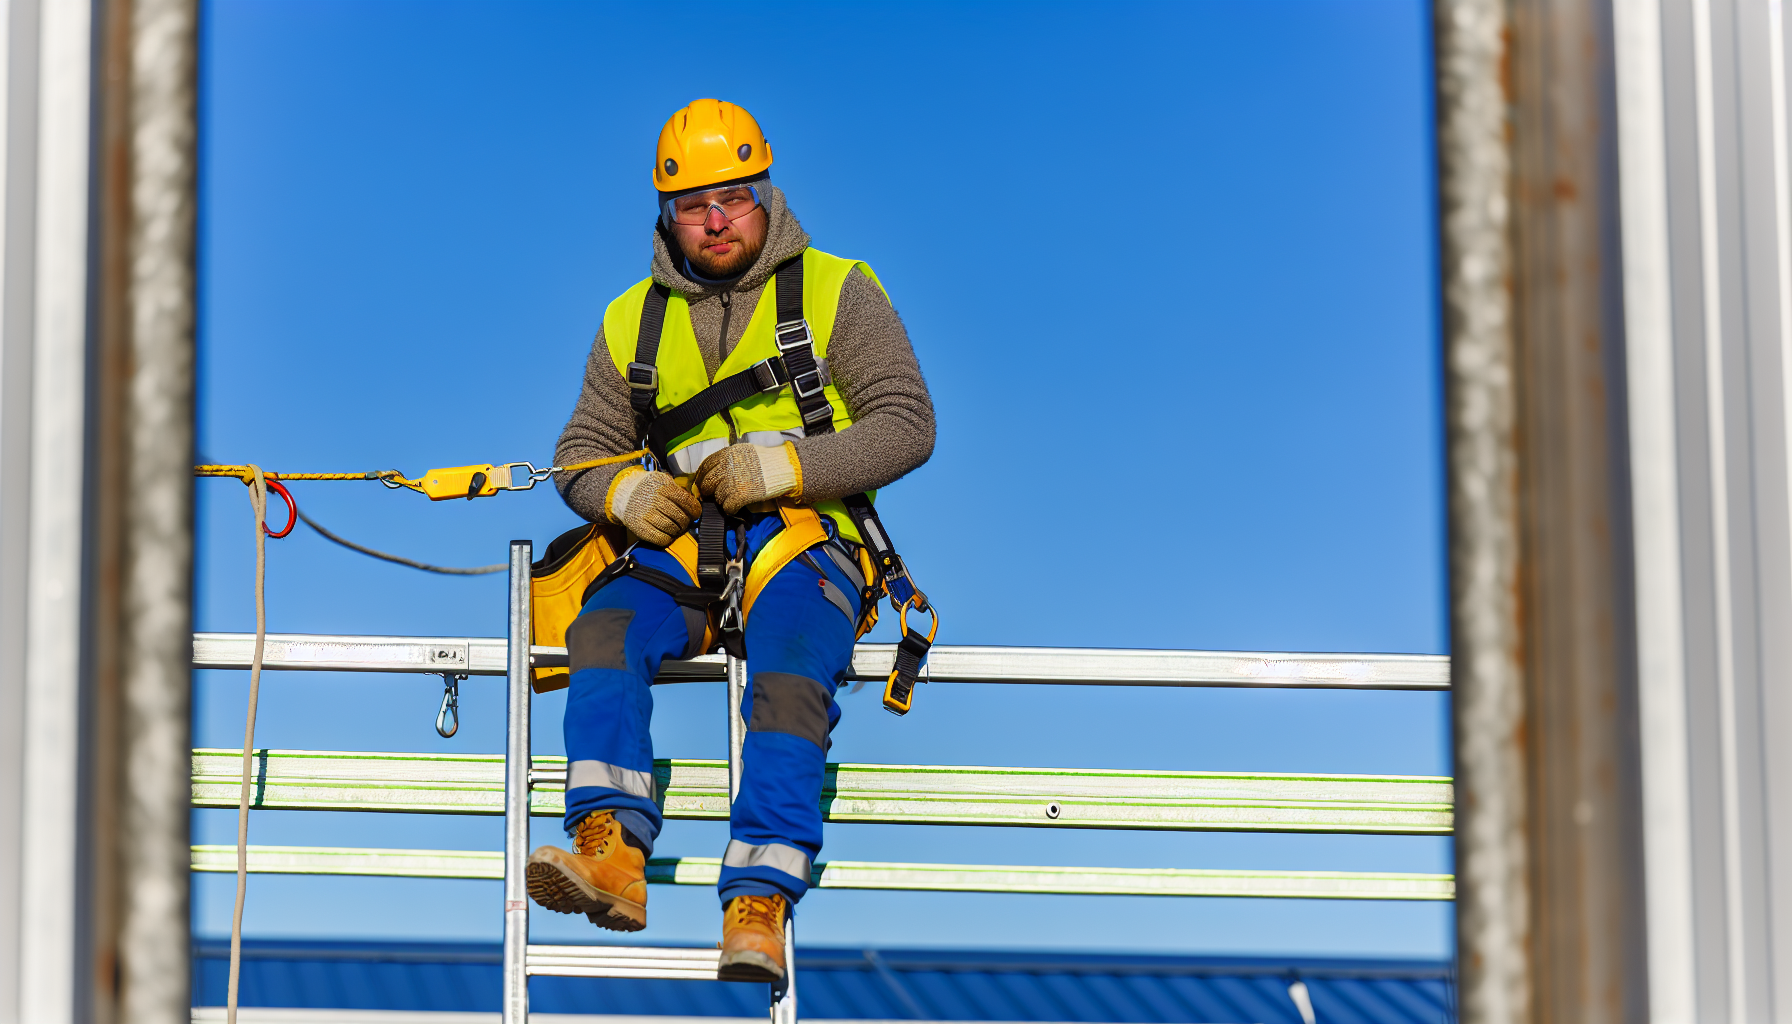 Worker using fall protection on a ladder